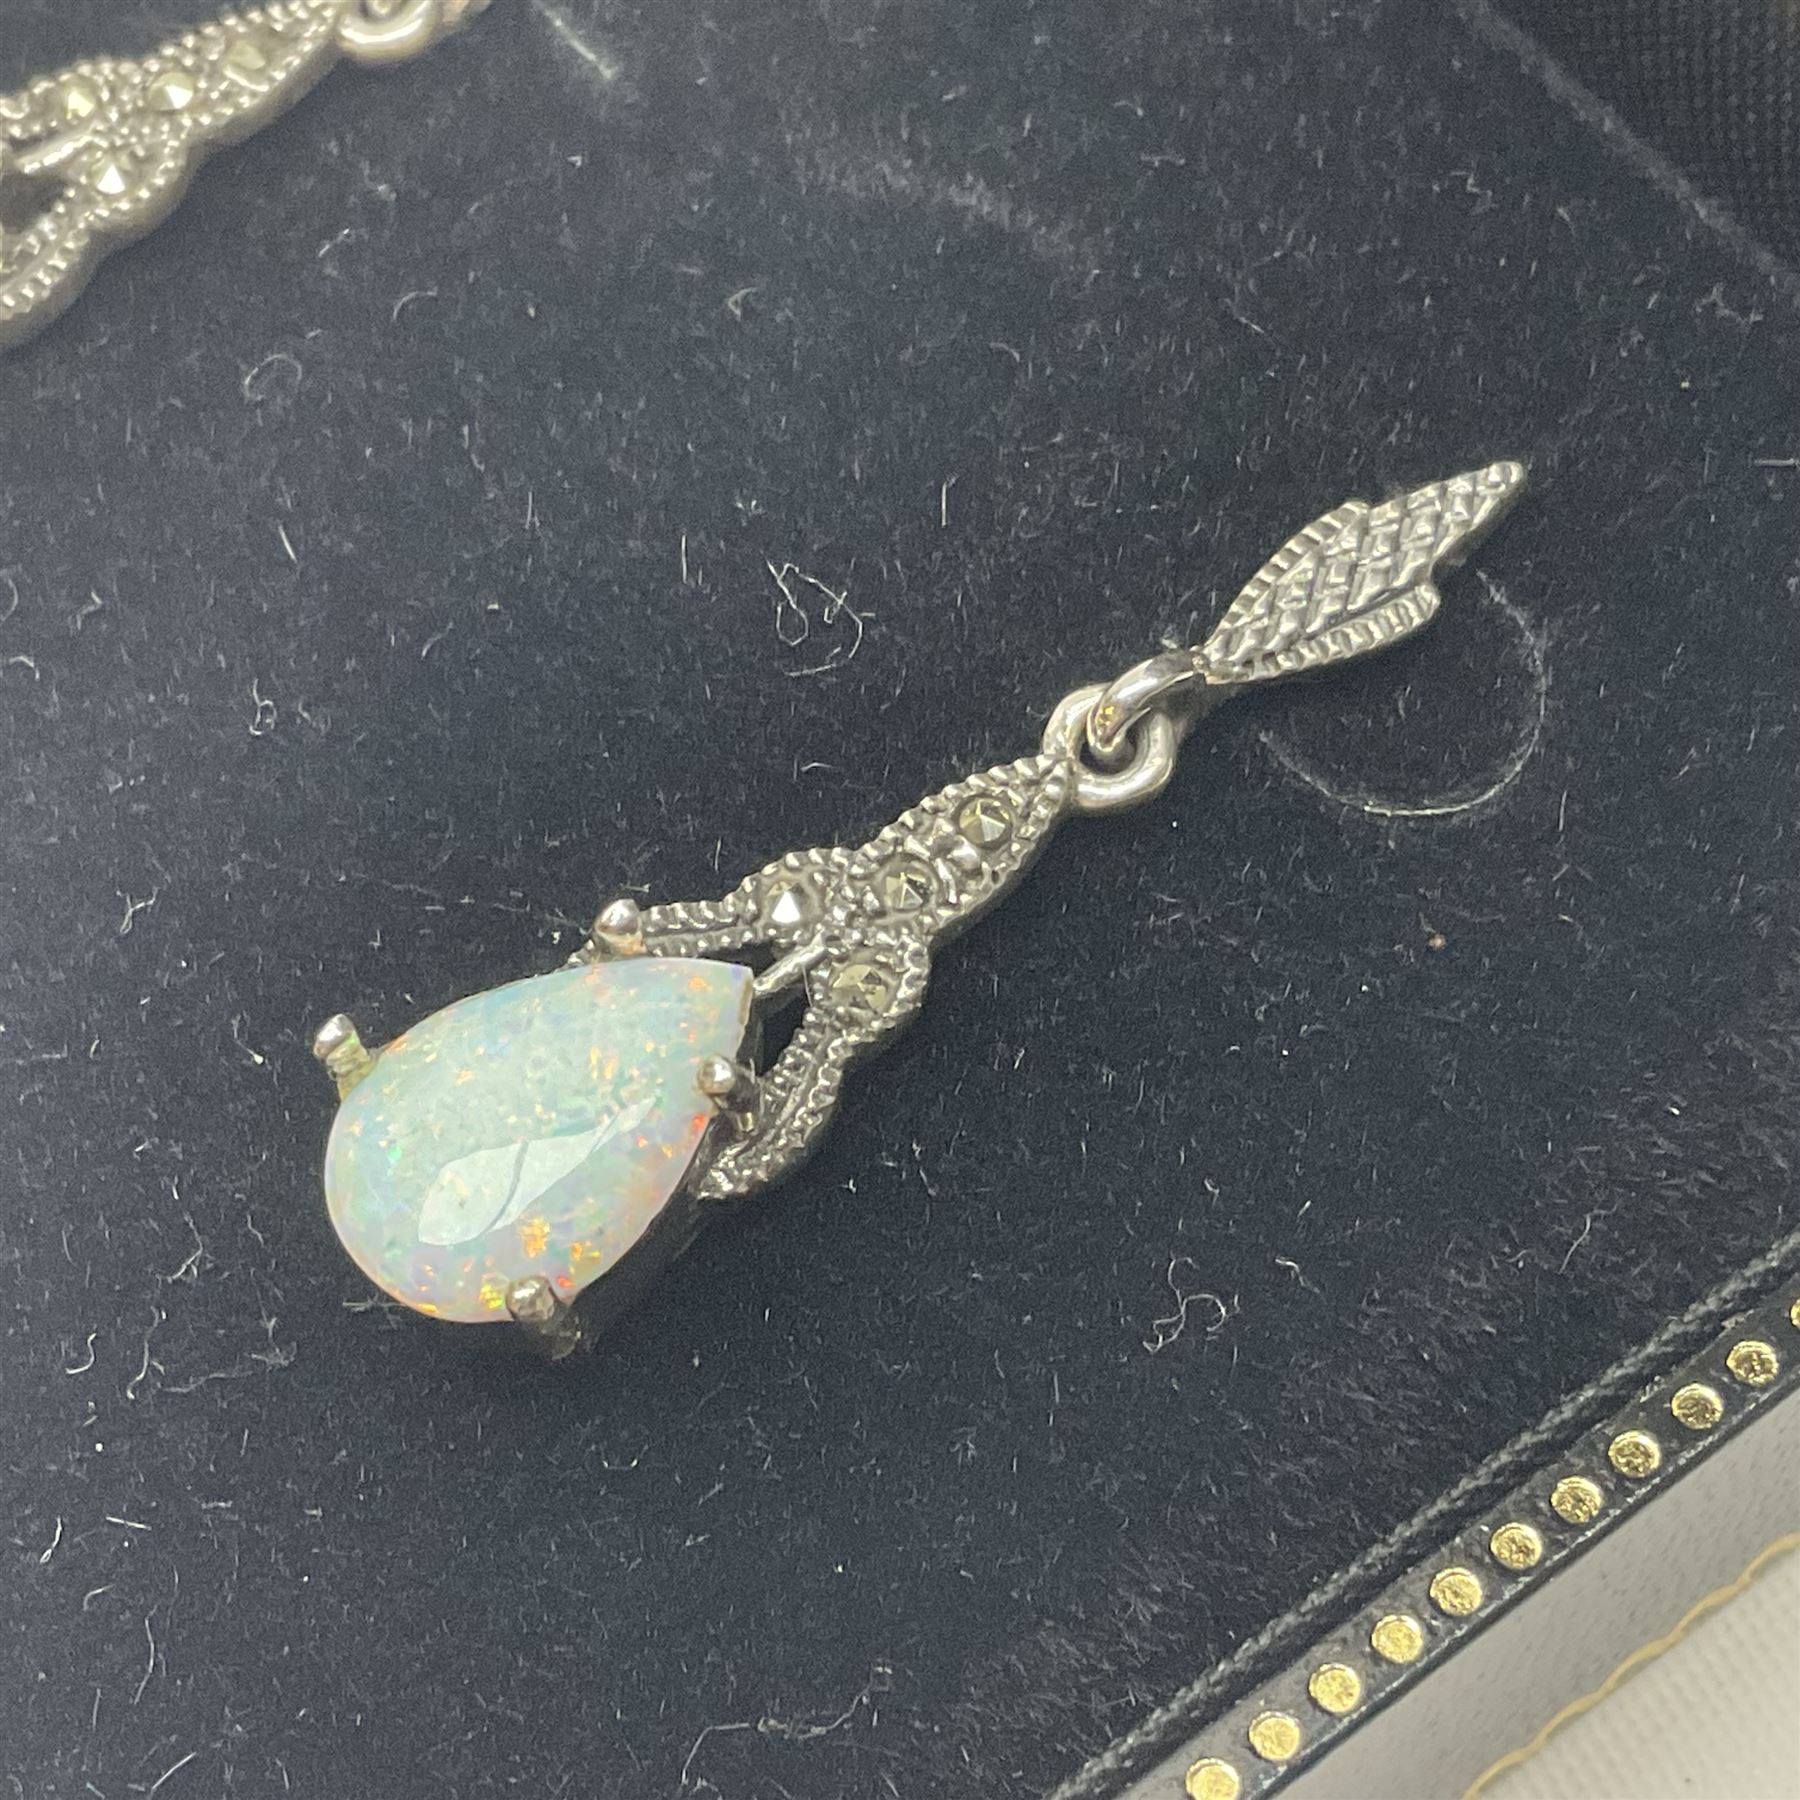 Pair of silver opal and marcasite pendant earrings - Image 3 of 4